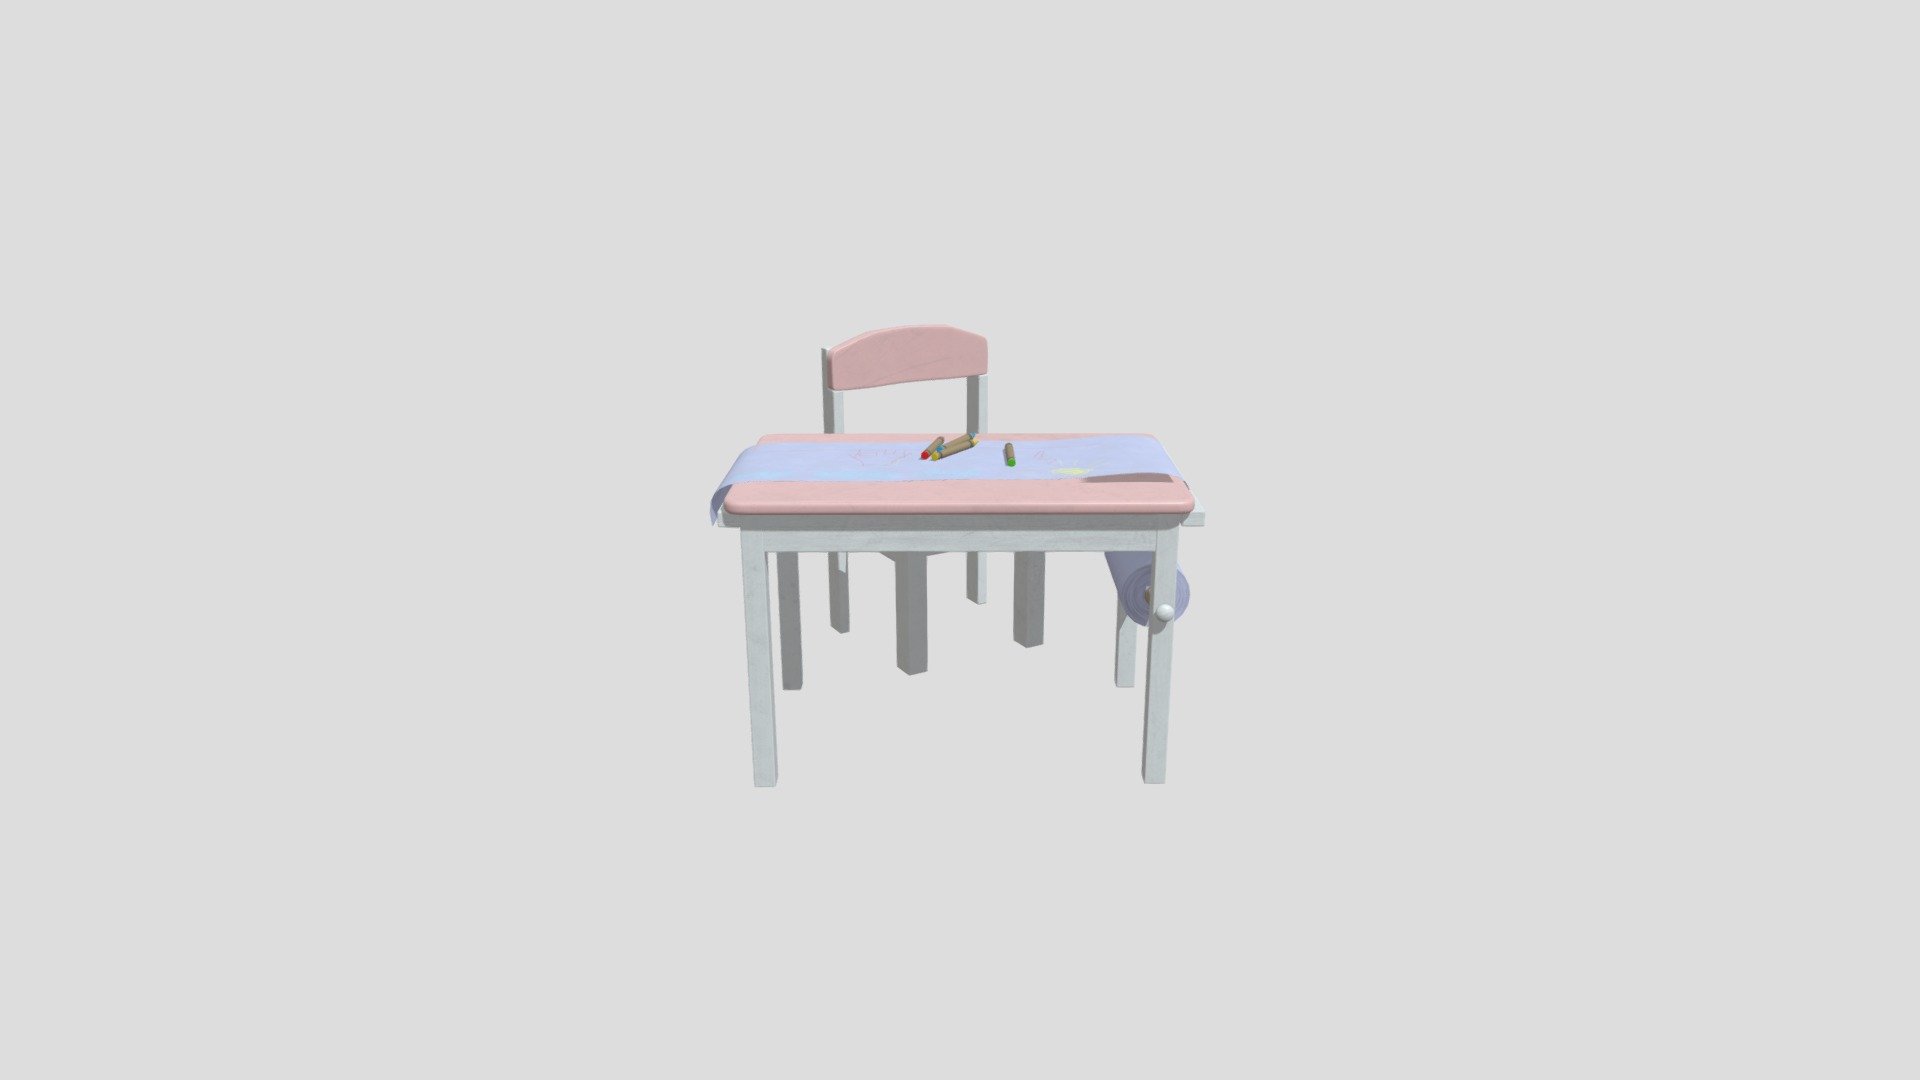 Highly detailed 3d model of child room furniture with all textures, shaders and materials. It is ready to use, just put it into your scene 3d model